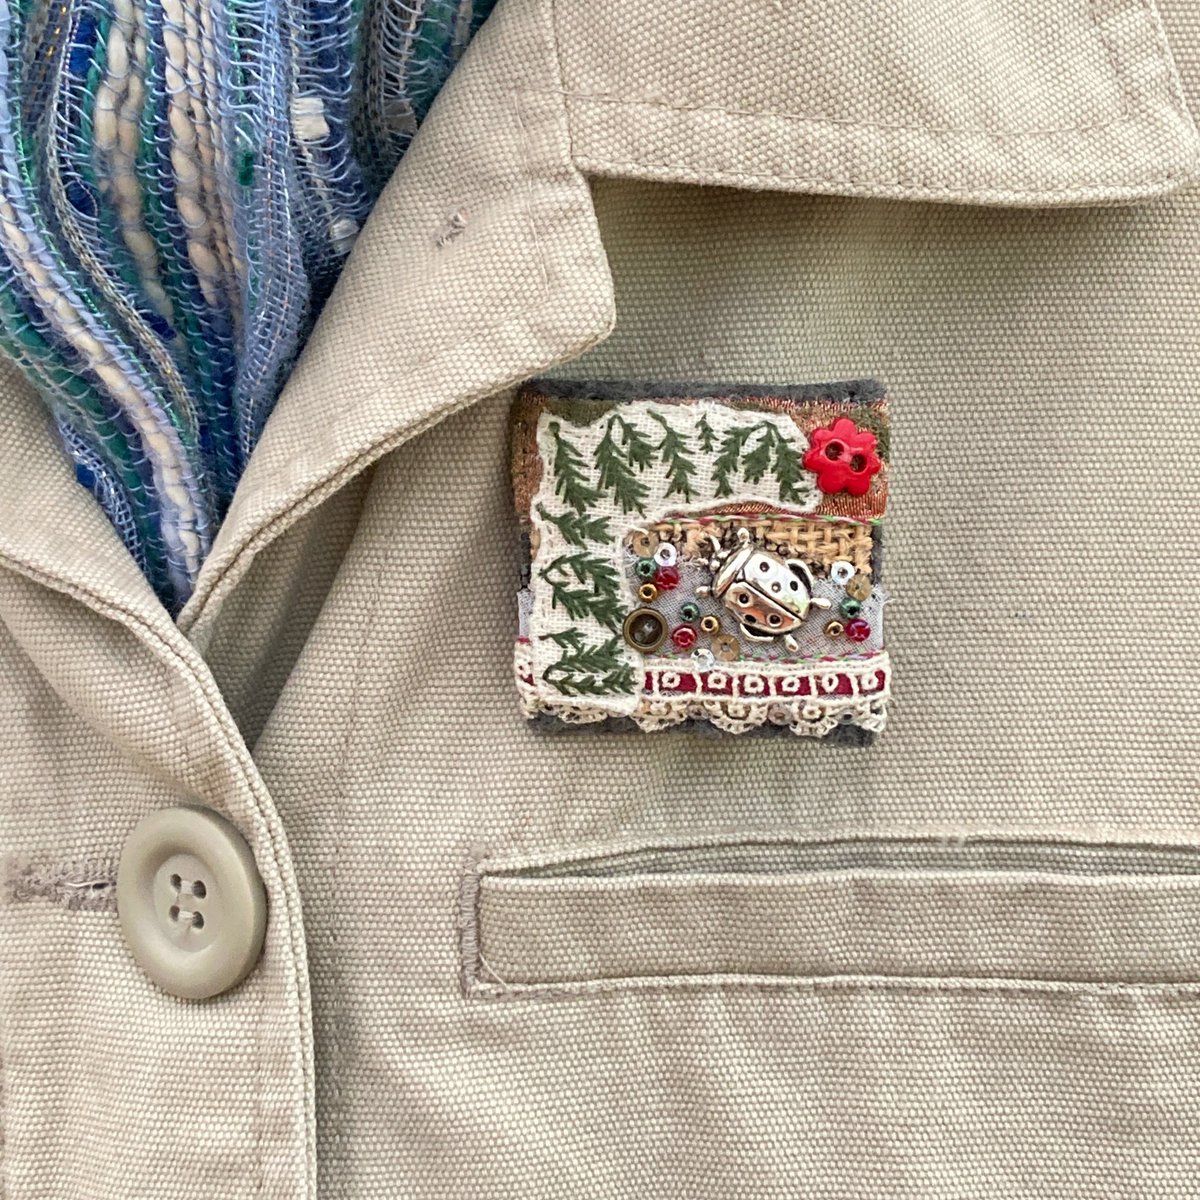 Forget the dreary, dull weather, it's time to add a bit of summer nature and prettiness to your outfits, jackets and fabric bags. Hand sewn from mixed fabrics, this pretty brooch features a detailed ladybird charm. elliestreasures.square.site/product/ladybi… #mhhsbd #shopindie #NatureLover